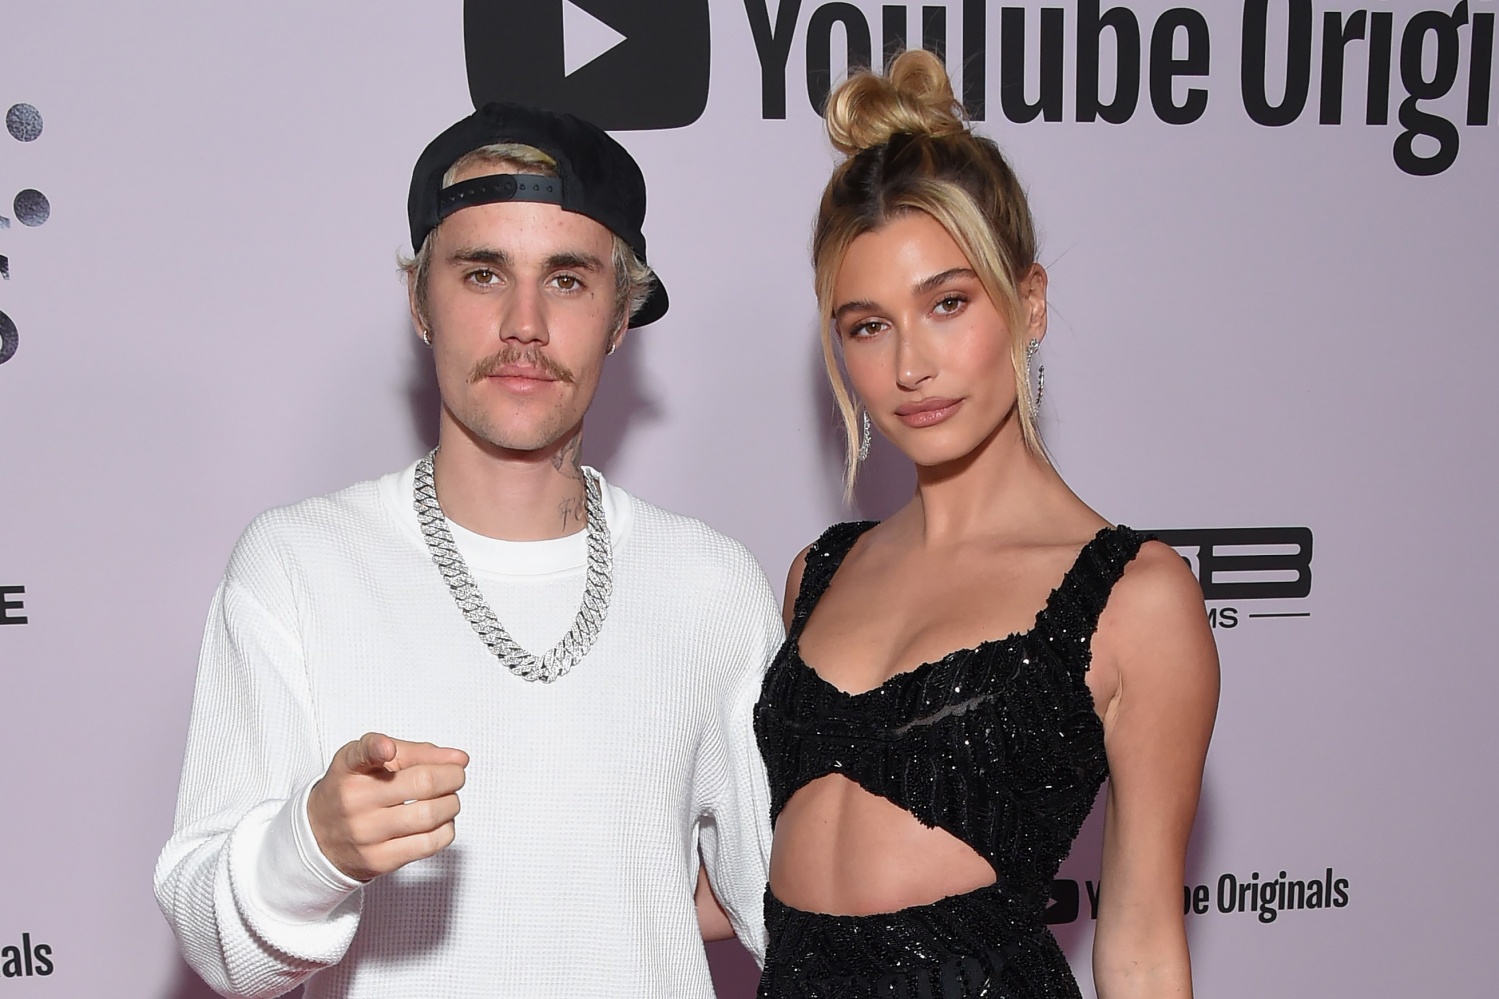 'Justin Bieber Divorce' Goes Viral: Story Behind the Topic Explained